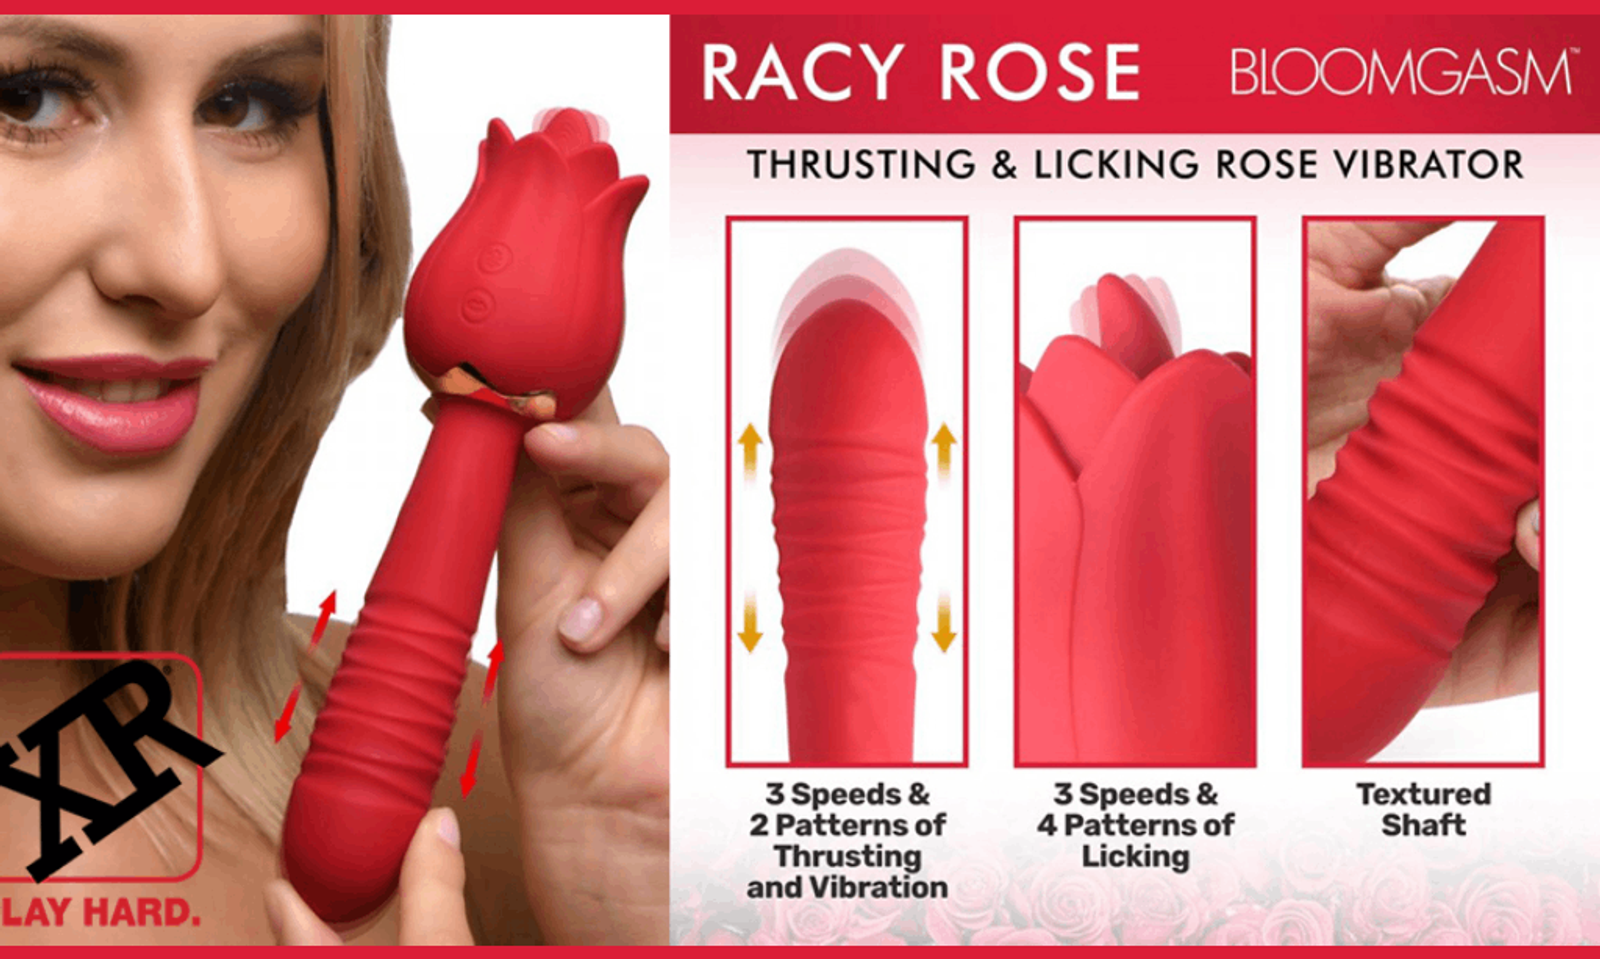 XR Brands Introduces ‘Racy Rose’ From Bloomgasm